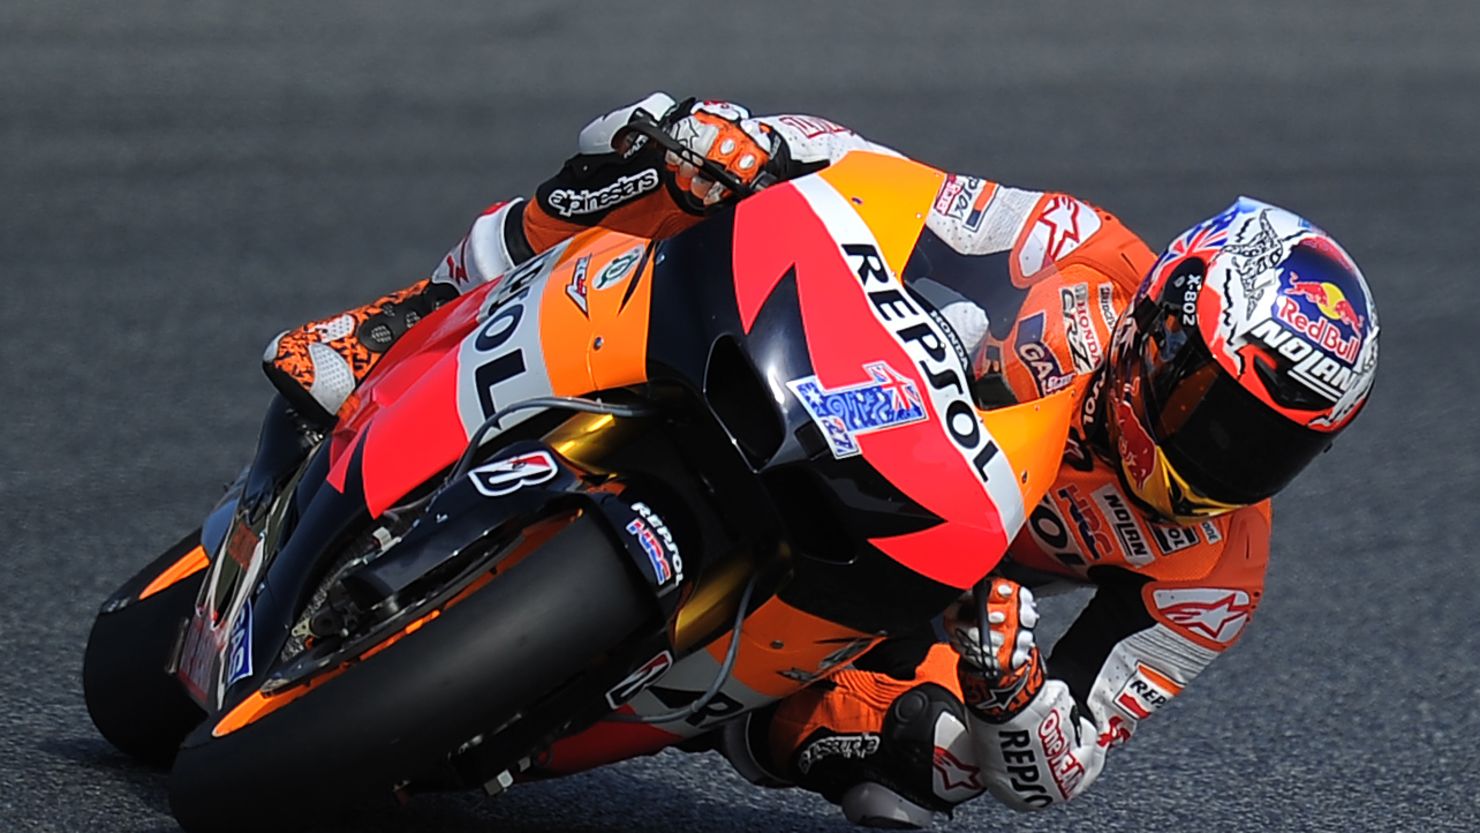 Australian motorcylist Casey Stoner in action at the Catalunya racetrack in Montmelo, near Barcelona, on Saturday.